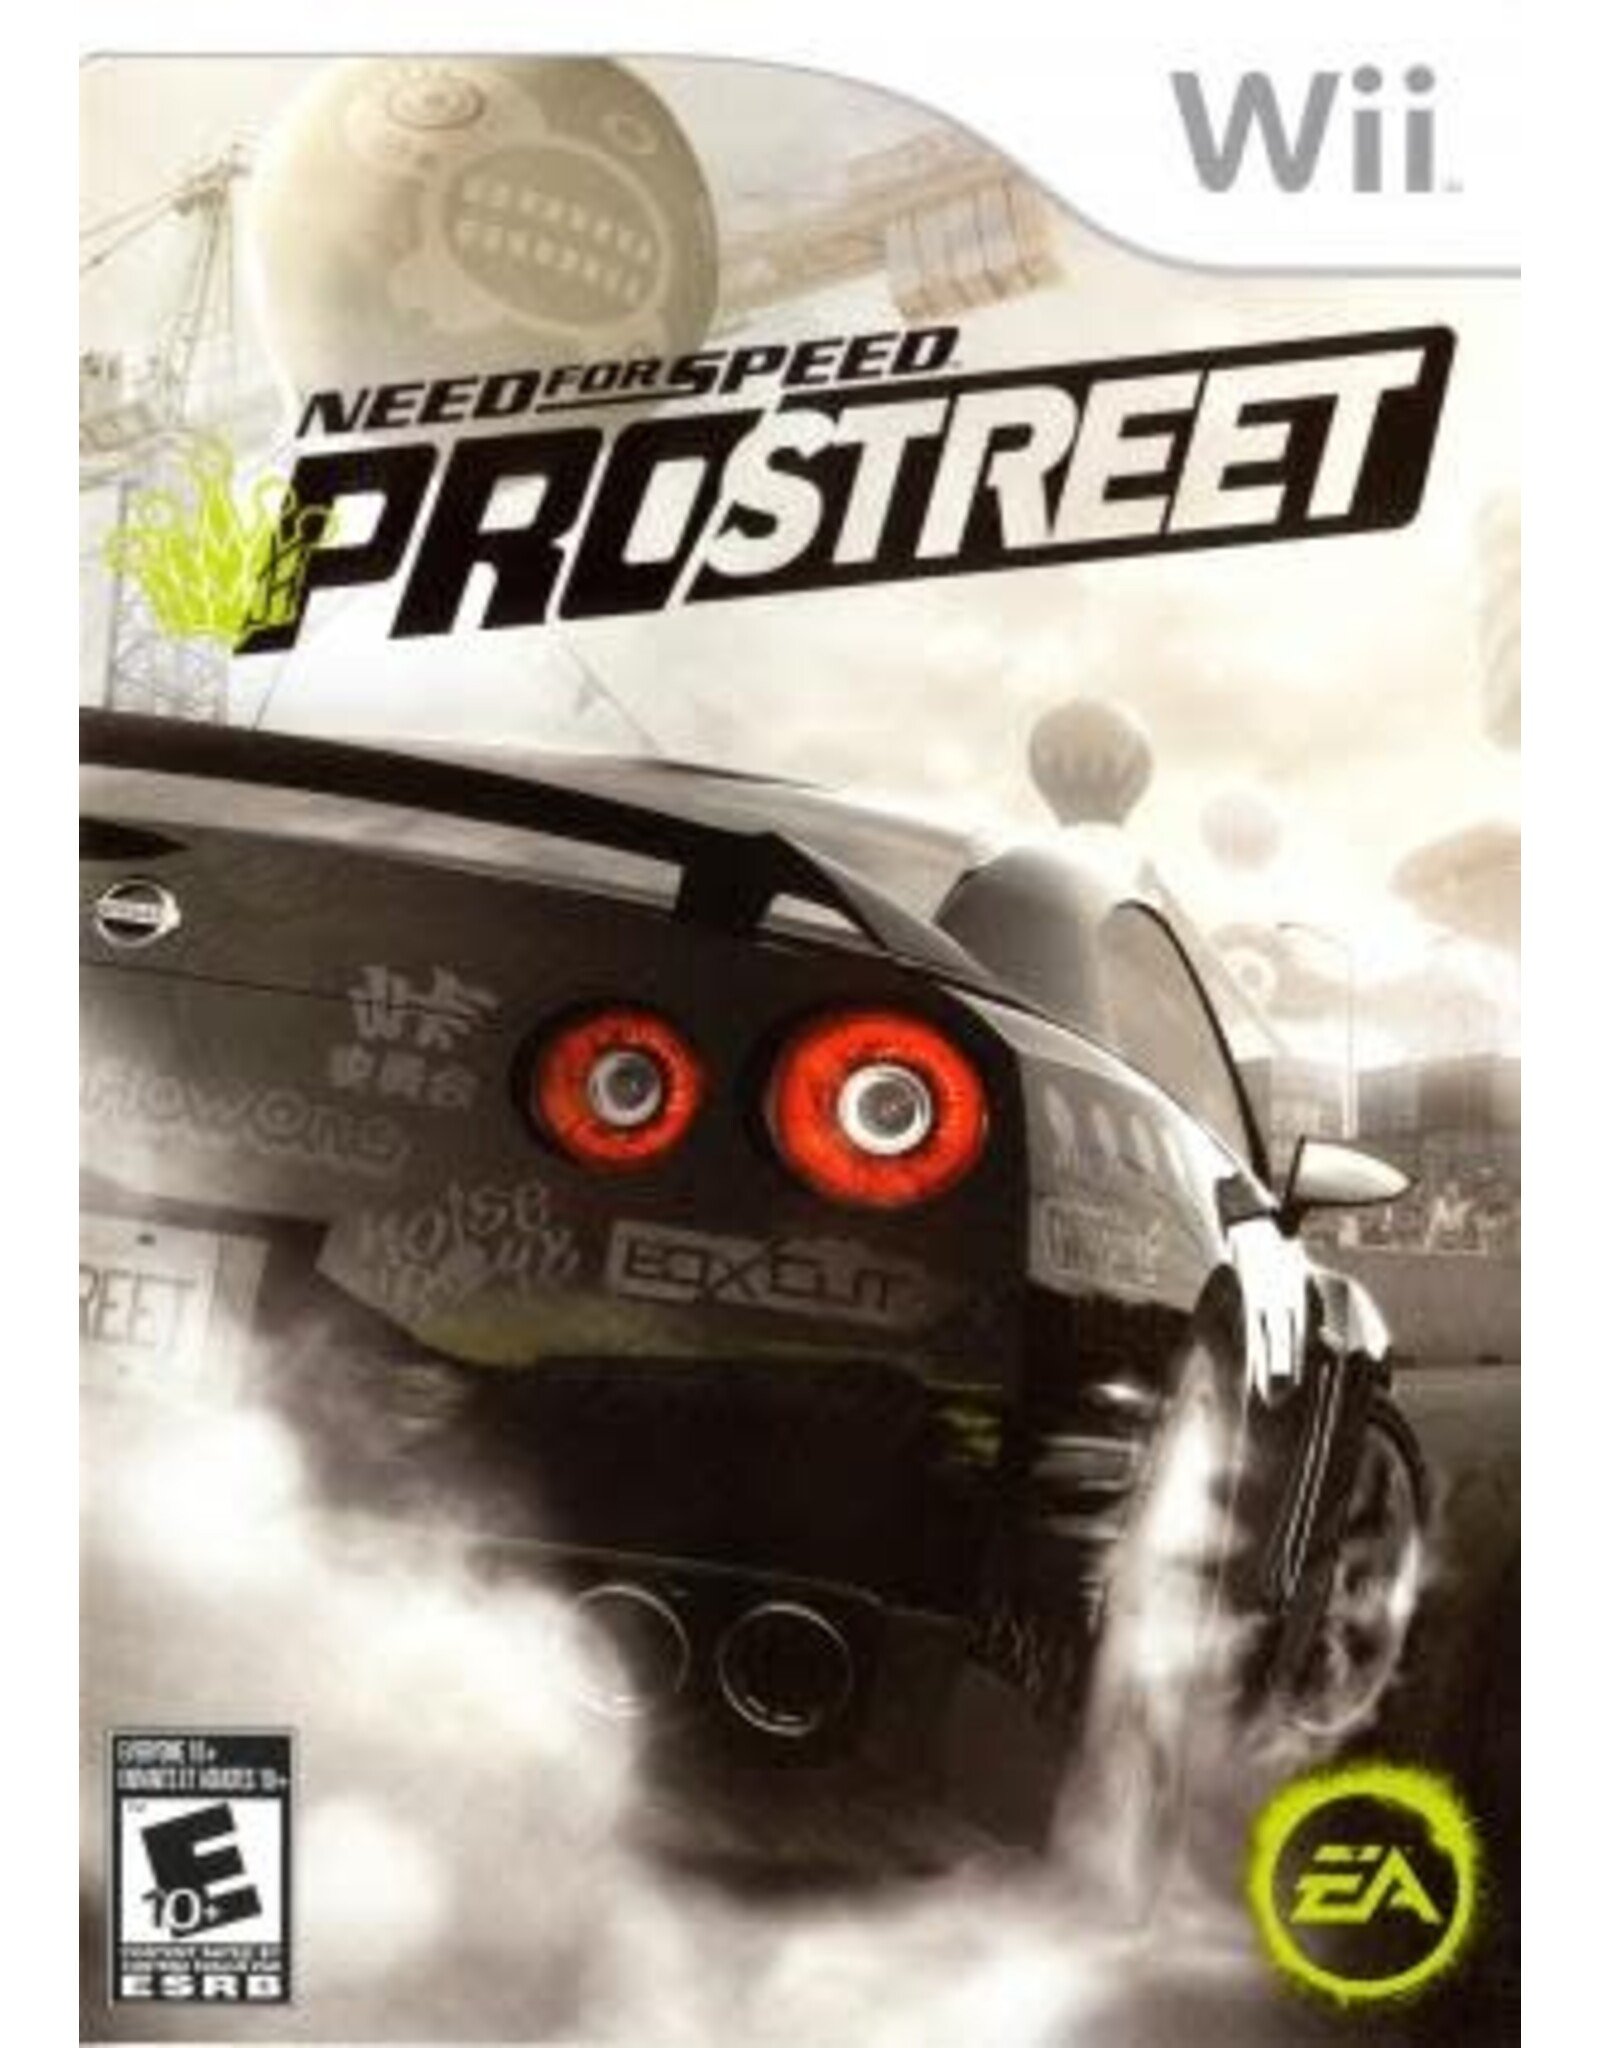 Wii Need for Speed Prostreet (No Manual)